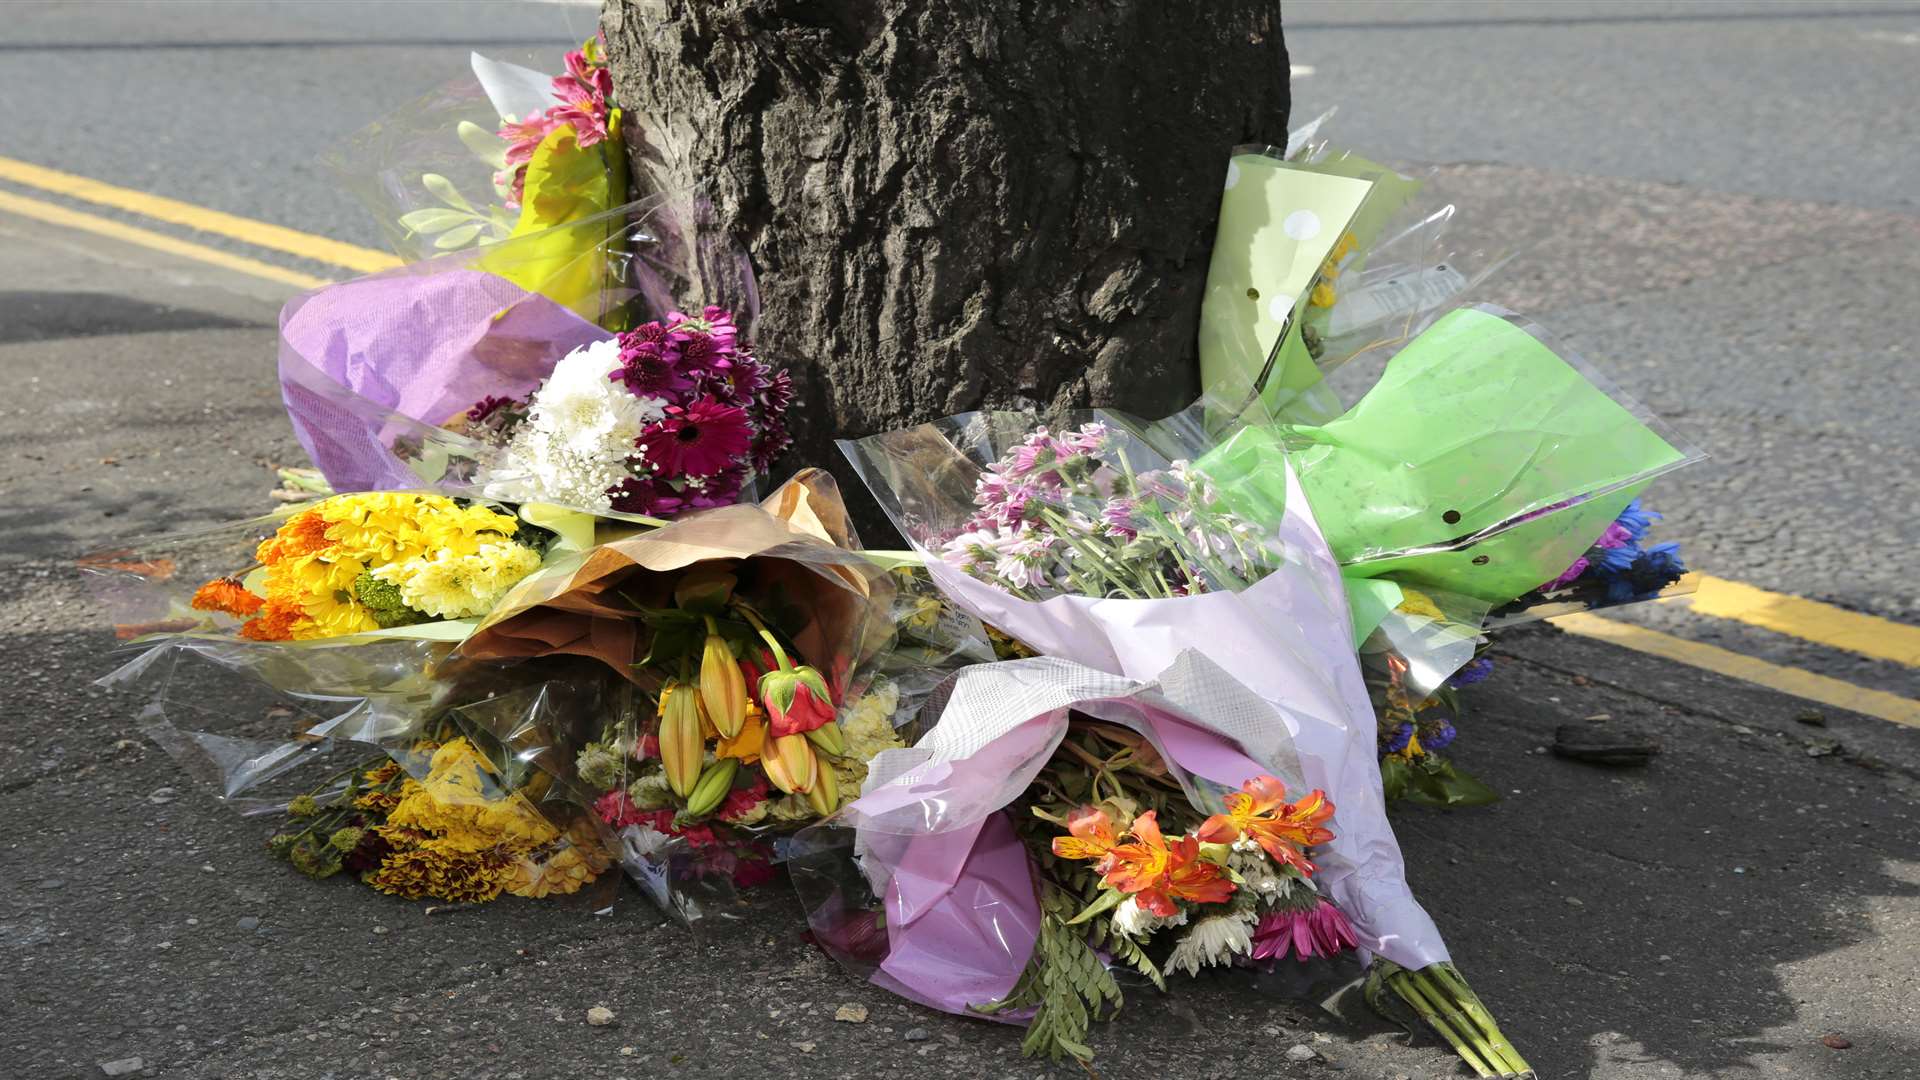 Floral tributes have been left at the scene of the crash. Picture: Martin Apps